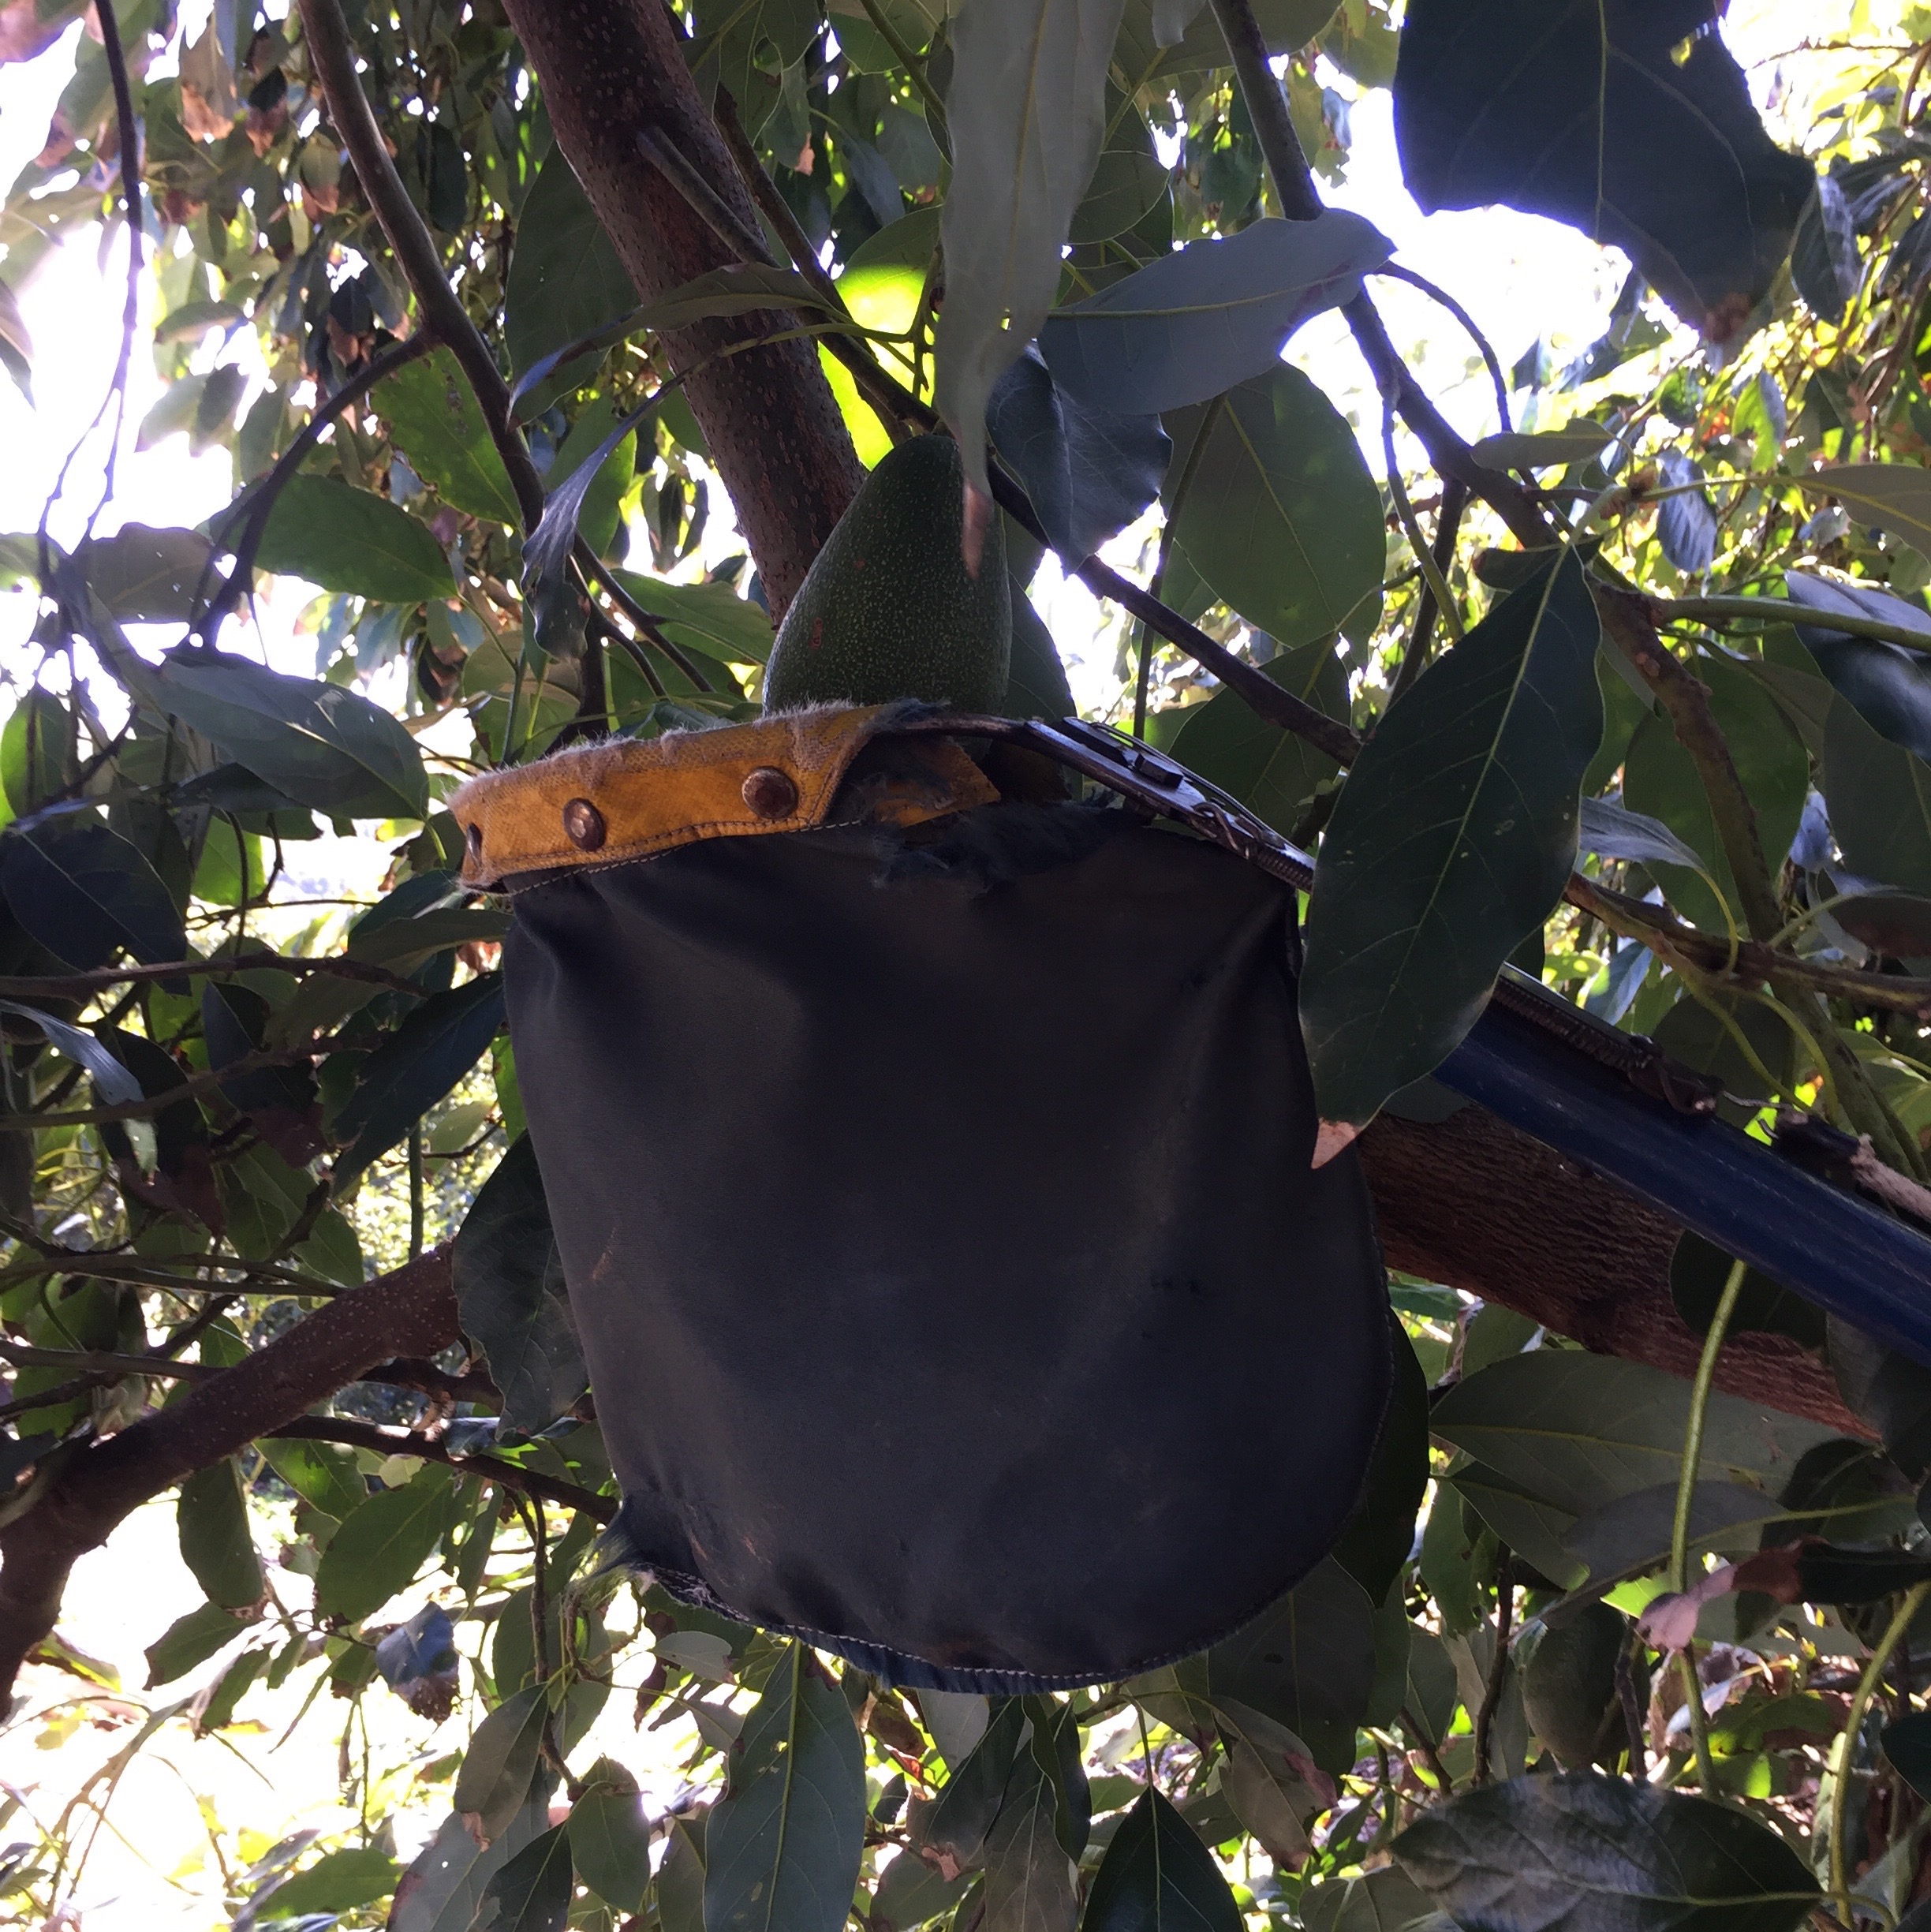 bag on the picking pole